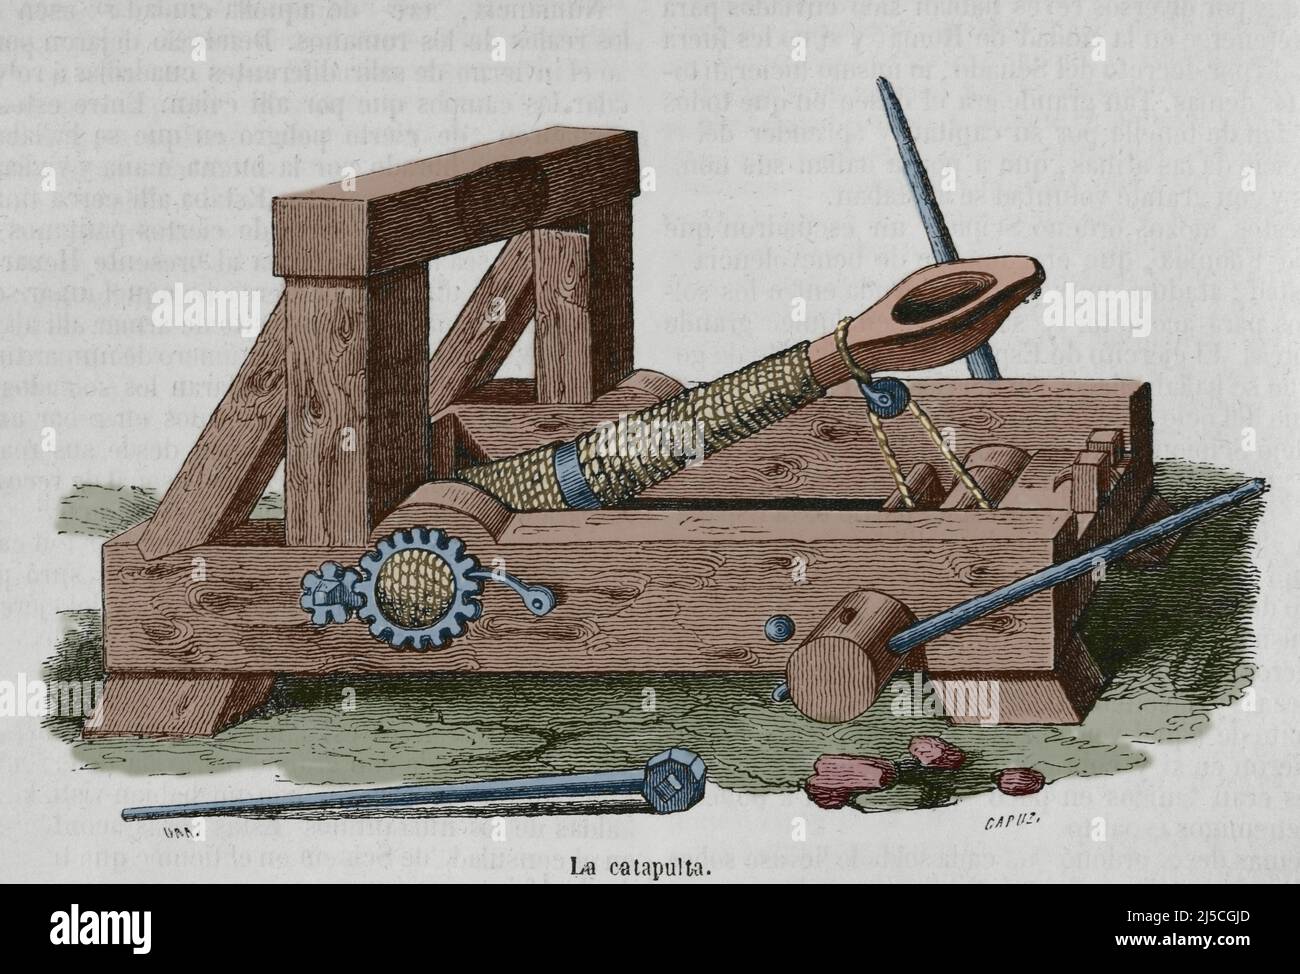 Ancient History. The catapult. Siege machine used to throw objects from a distance as projectiles. Engraving by Capuz. Later colouration. Historia General de España by Father Mariana. Madrid, 1852. Stock Photo